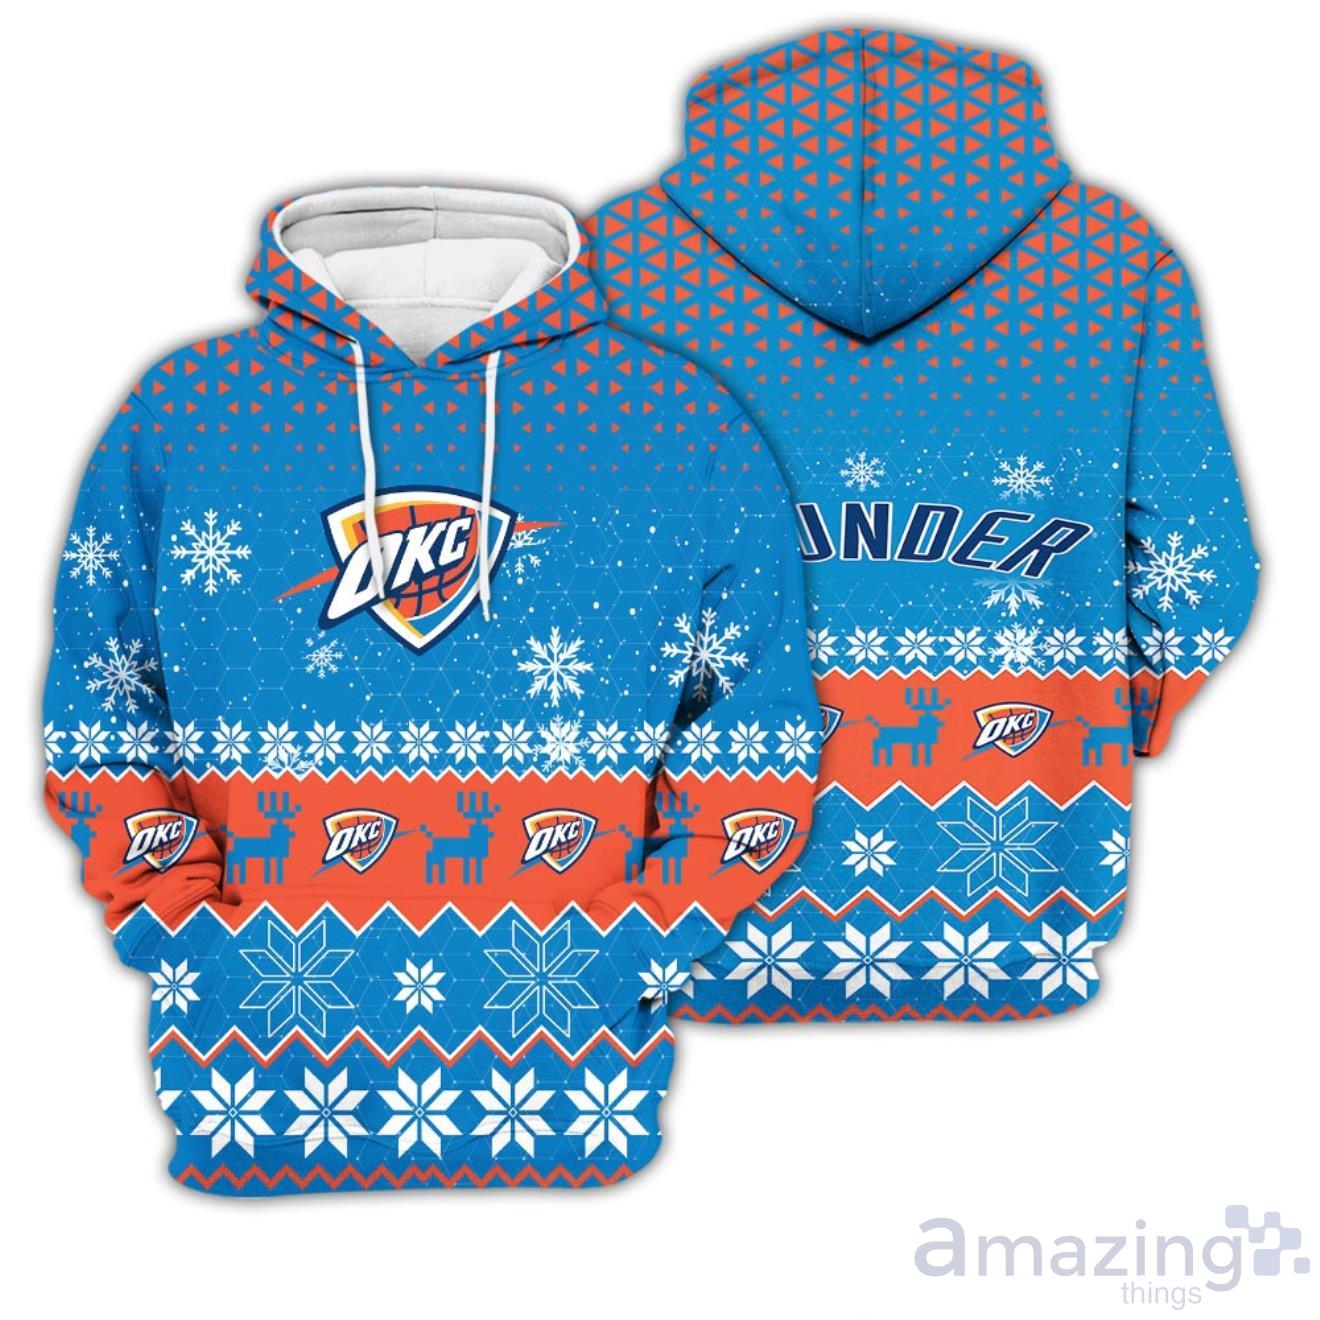 PHOTO: What do you think of the Thunder's Christmas jerseys?